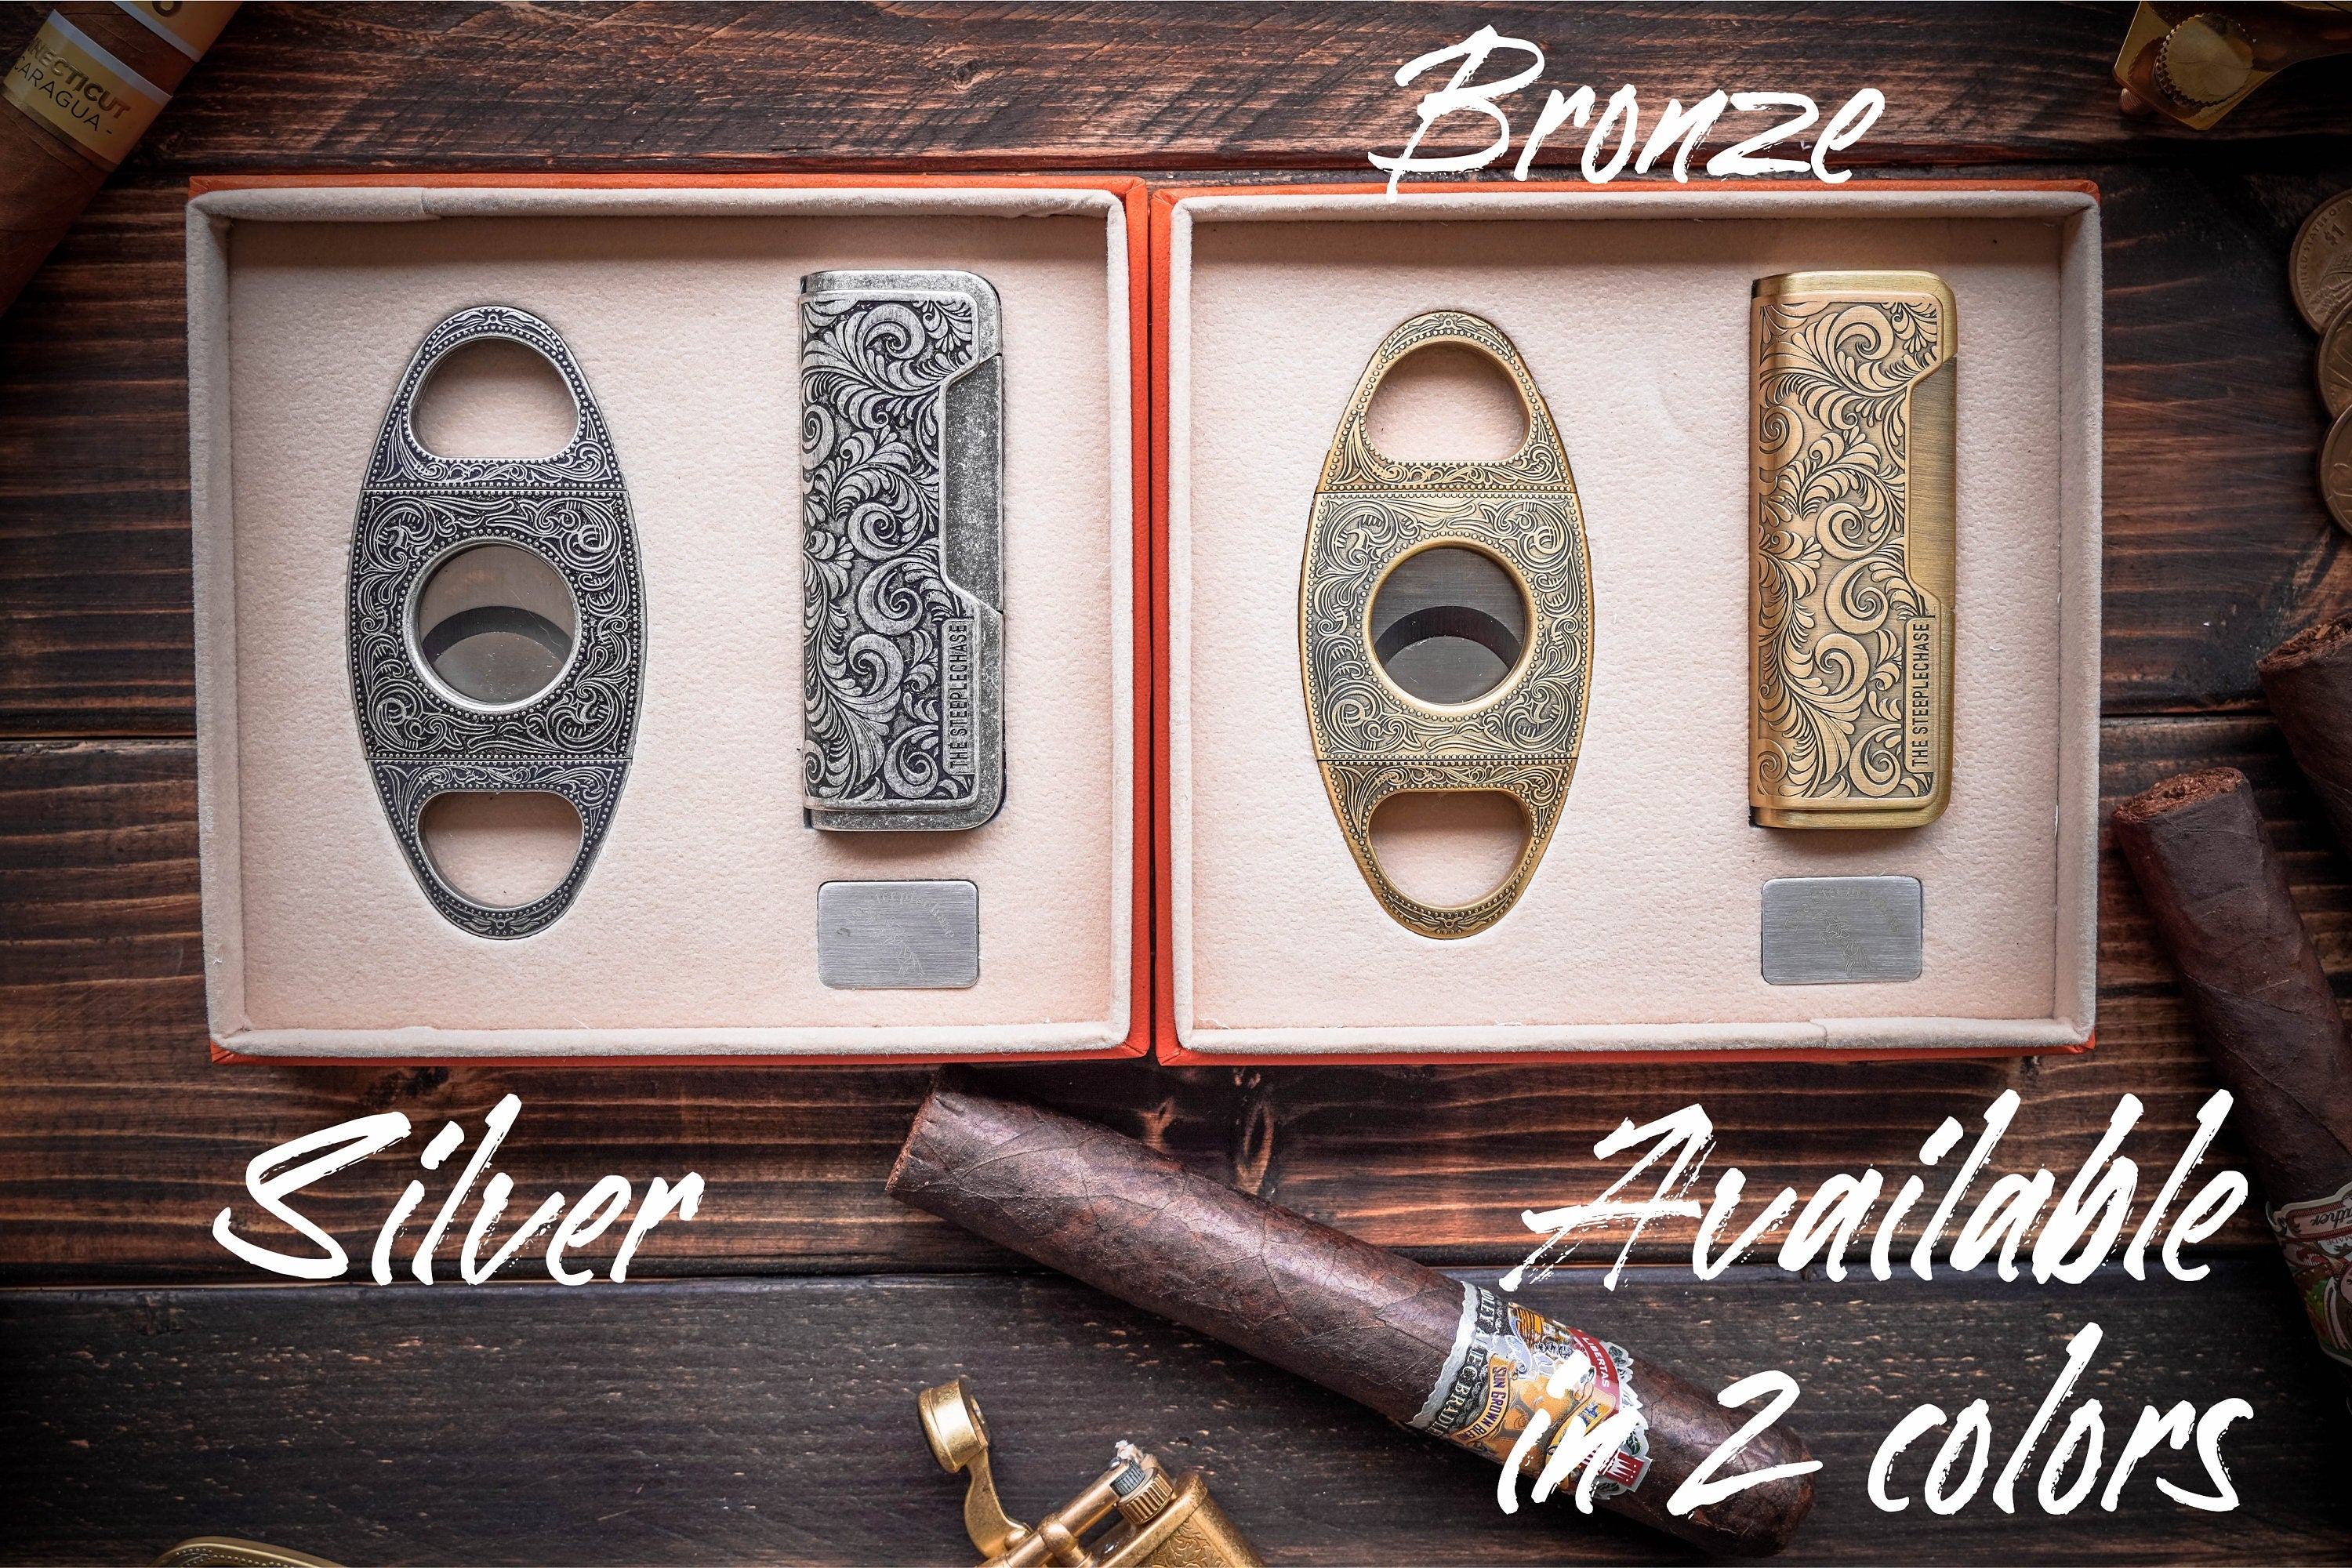 Cigars Accessories Set, Retirement Gift, Groomsman Gift, Gift For Him, Cigar Cutter, Torch Cigar Lighter, Engraved Gift, Christmas Gifts For